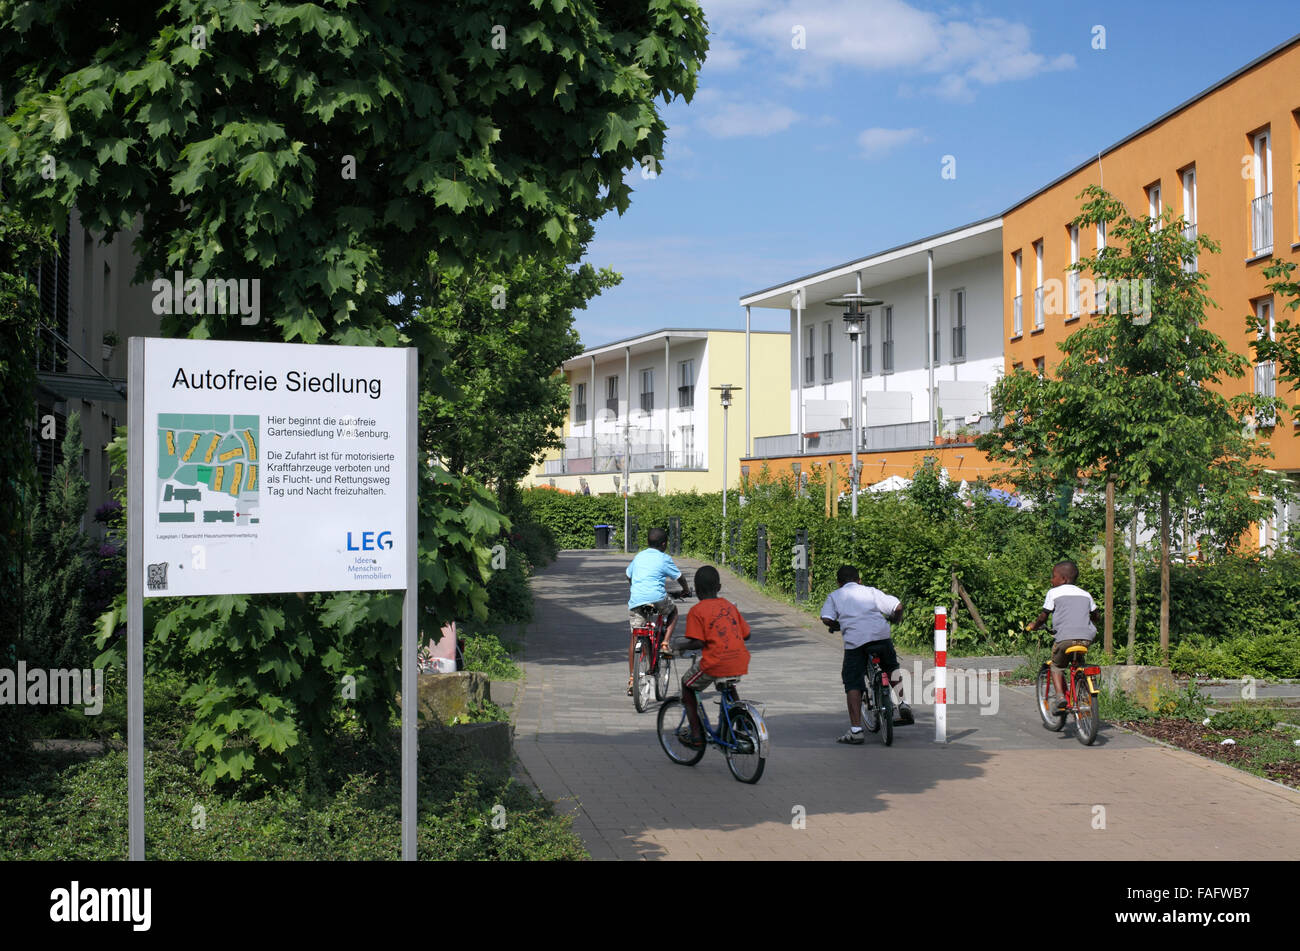 One of the entrances to the car-free settlement of Gartensiedlung Weissenburg, Muenster, Germany. (With map of estate layout.) Stock Photo